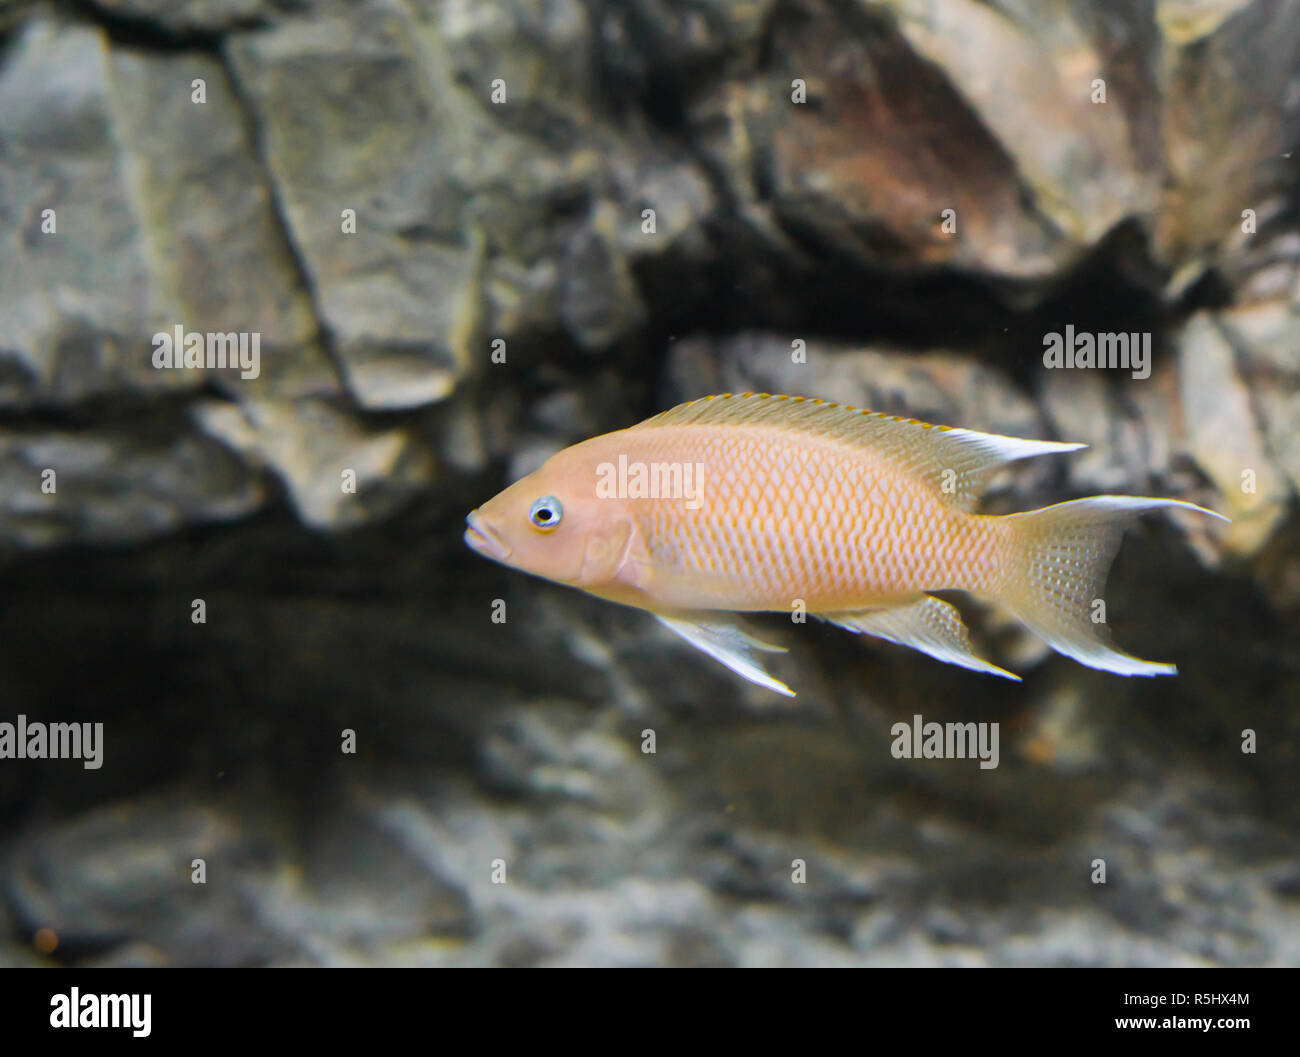 pink malawi cichlid fish in closeup, a popular tropical aquarium pet from lake malawi in Africa Stock Photo